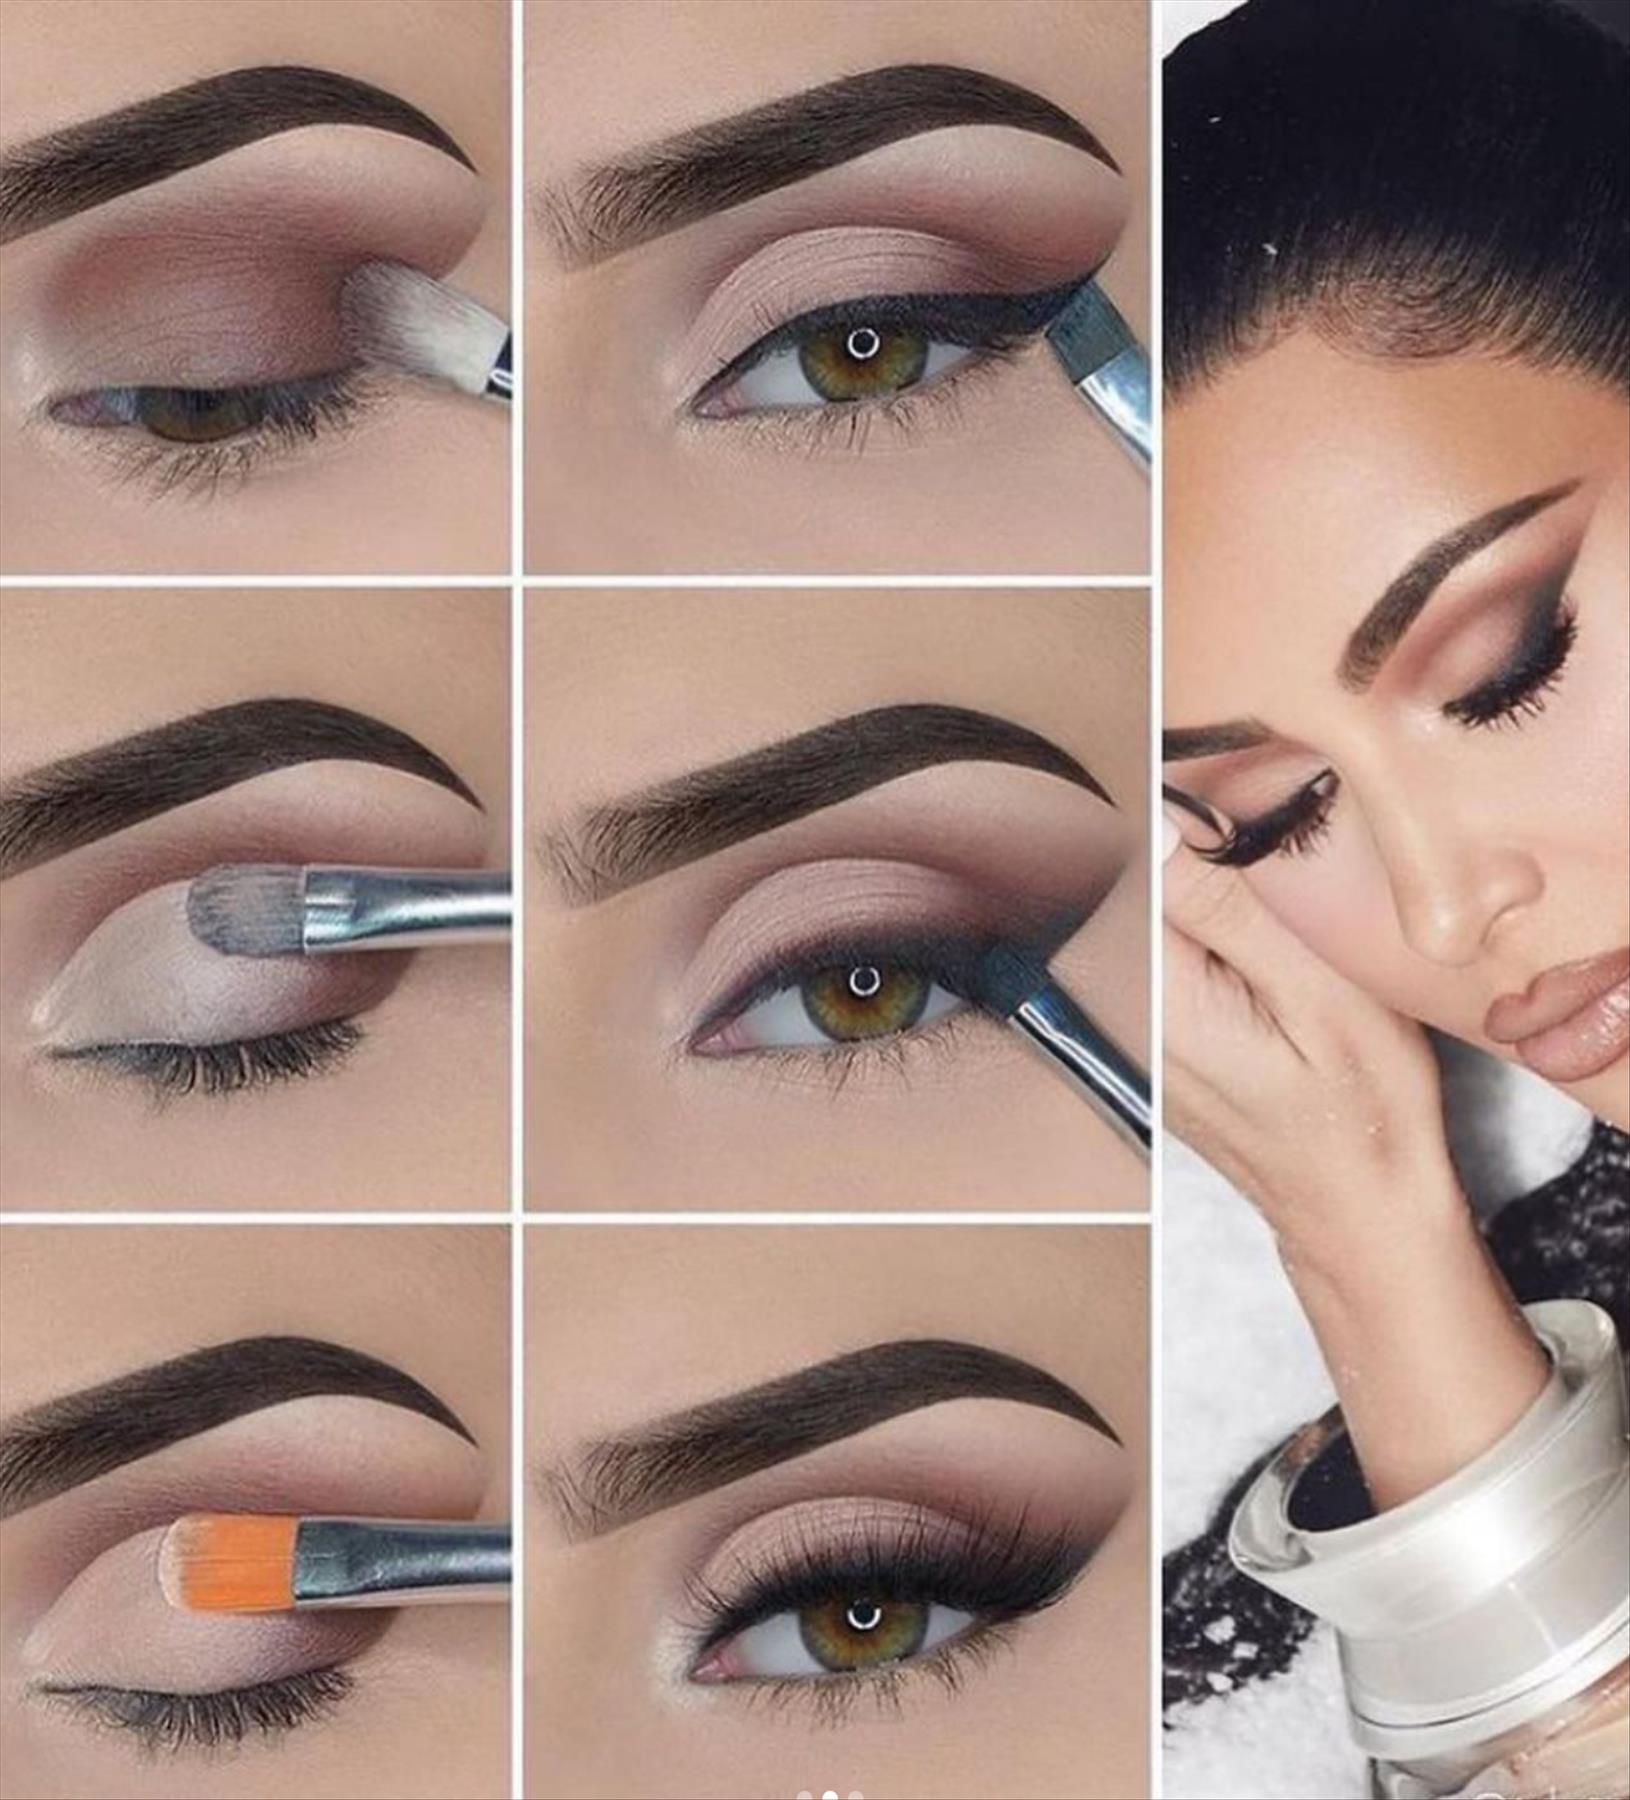 how to draw eyeshadow makeup step by step